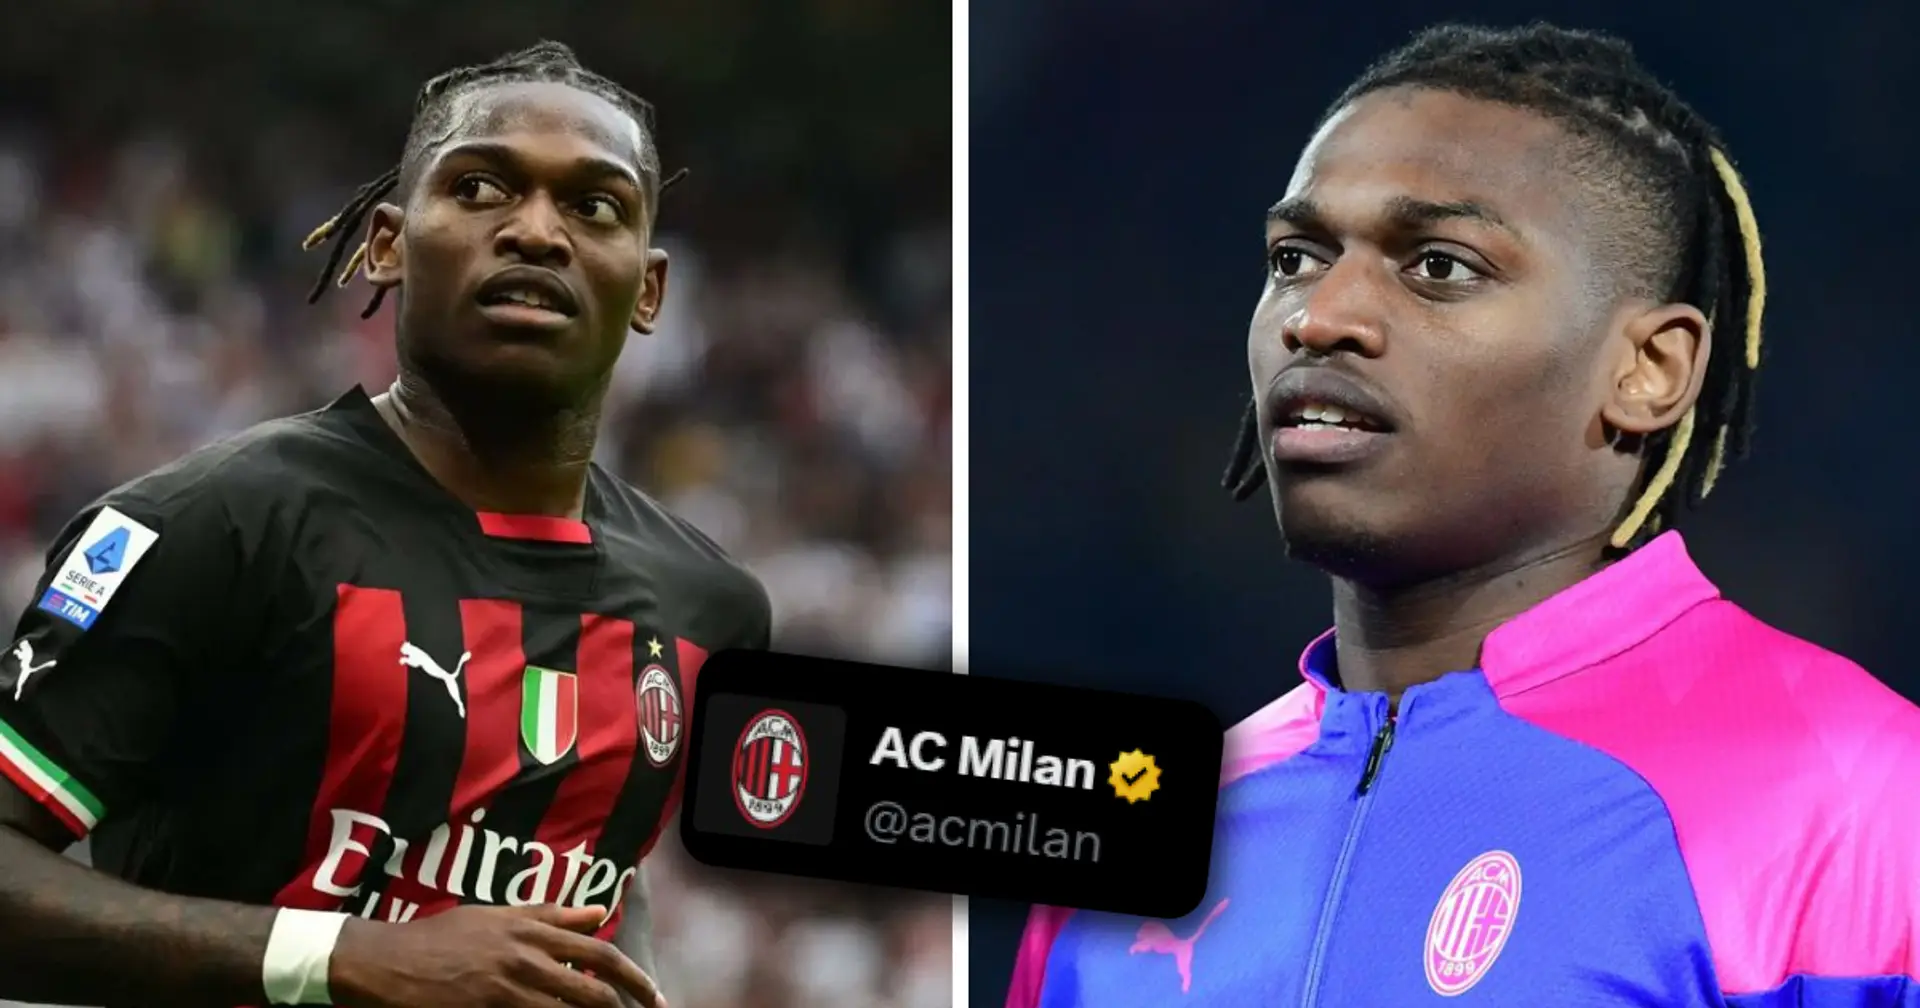 AC Milan support Rafael Leao after alleged racist abuse on social media